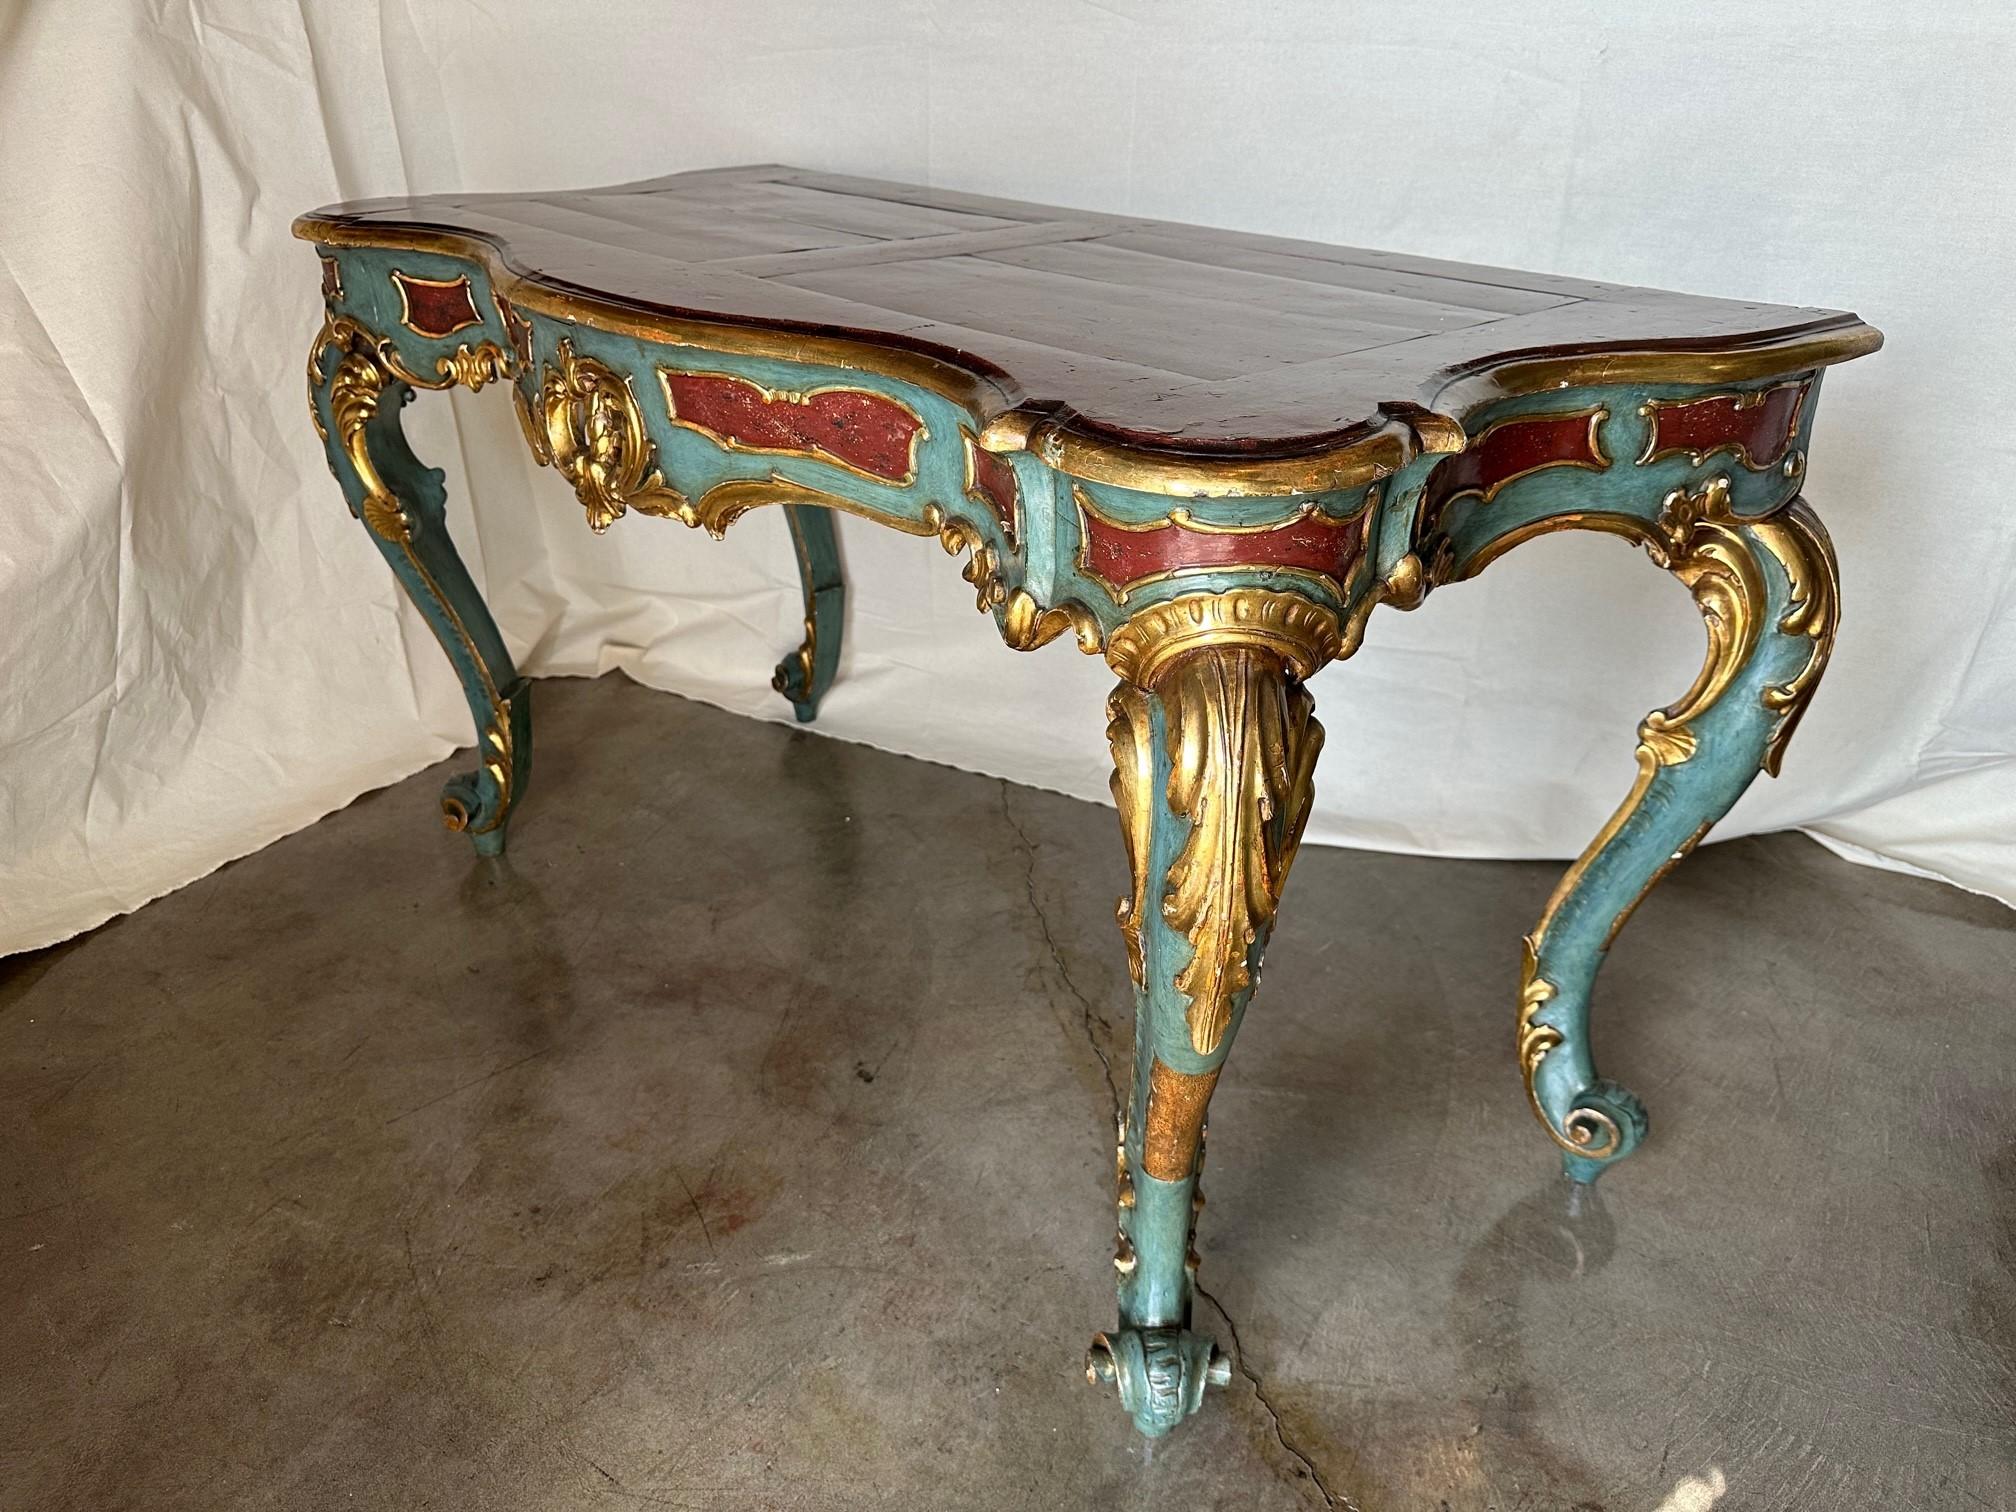 Wood Venetian Rococo Gilt Painted Faux Stone Console Entry Table Office Desk Antique For Sale